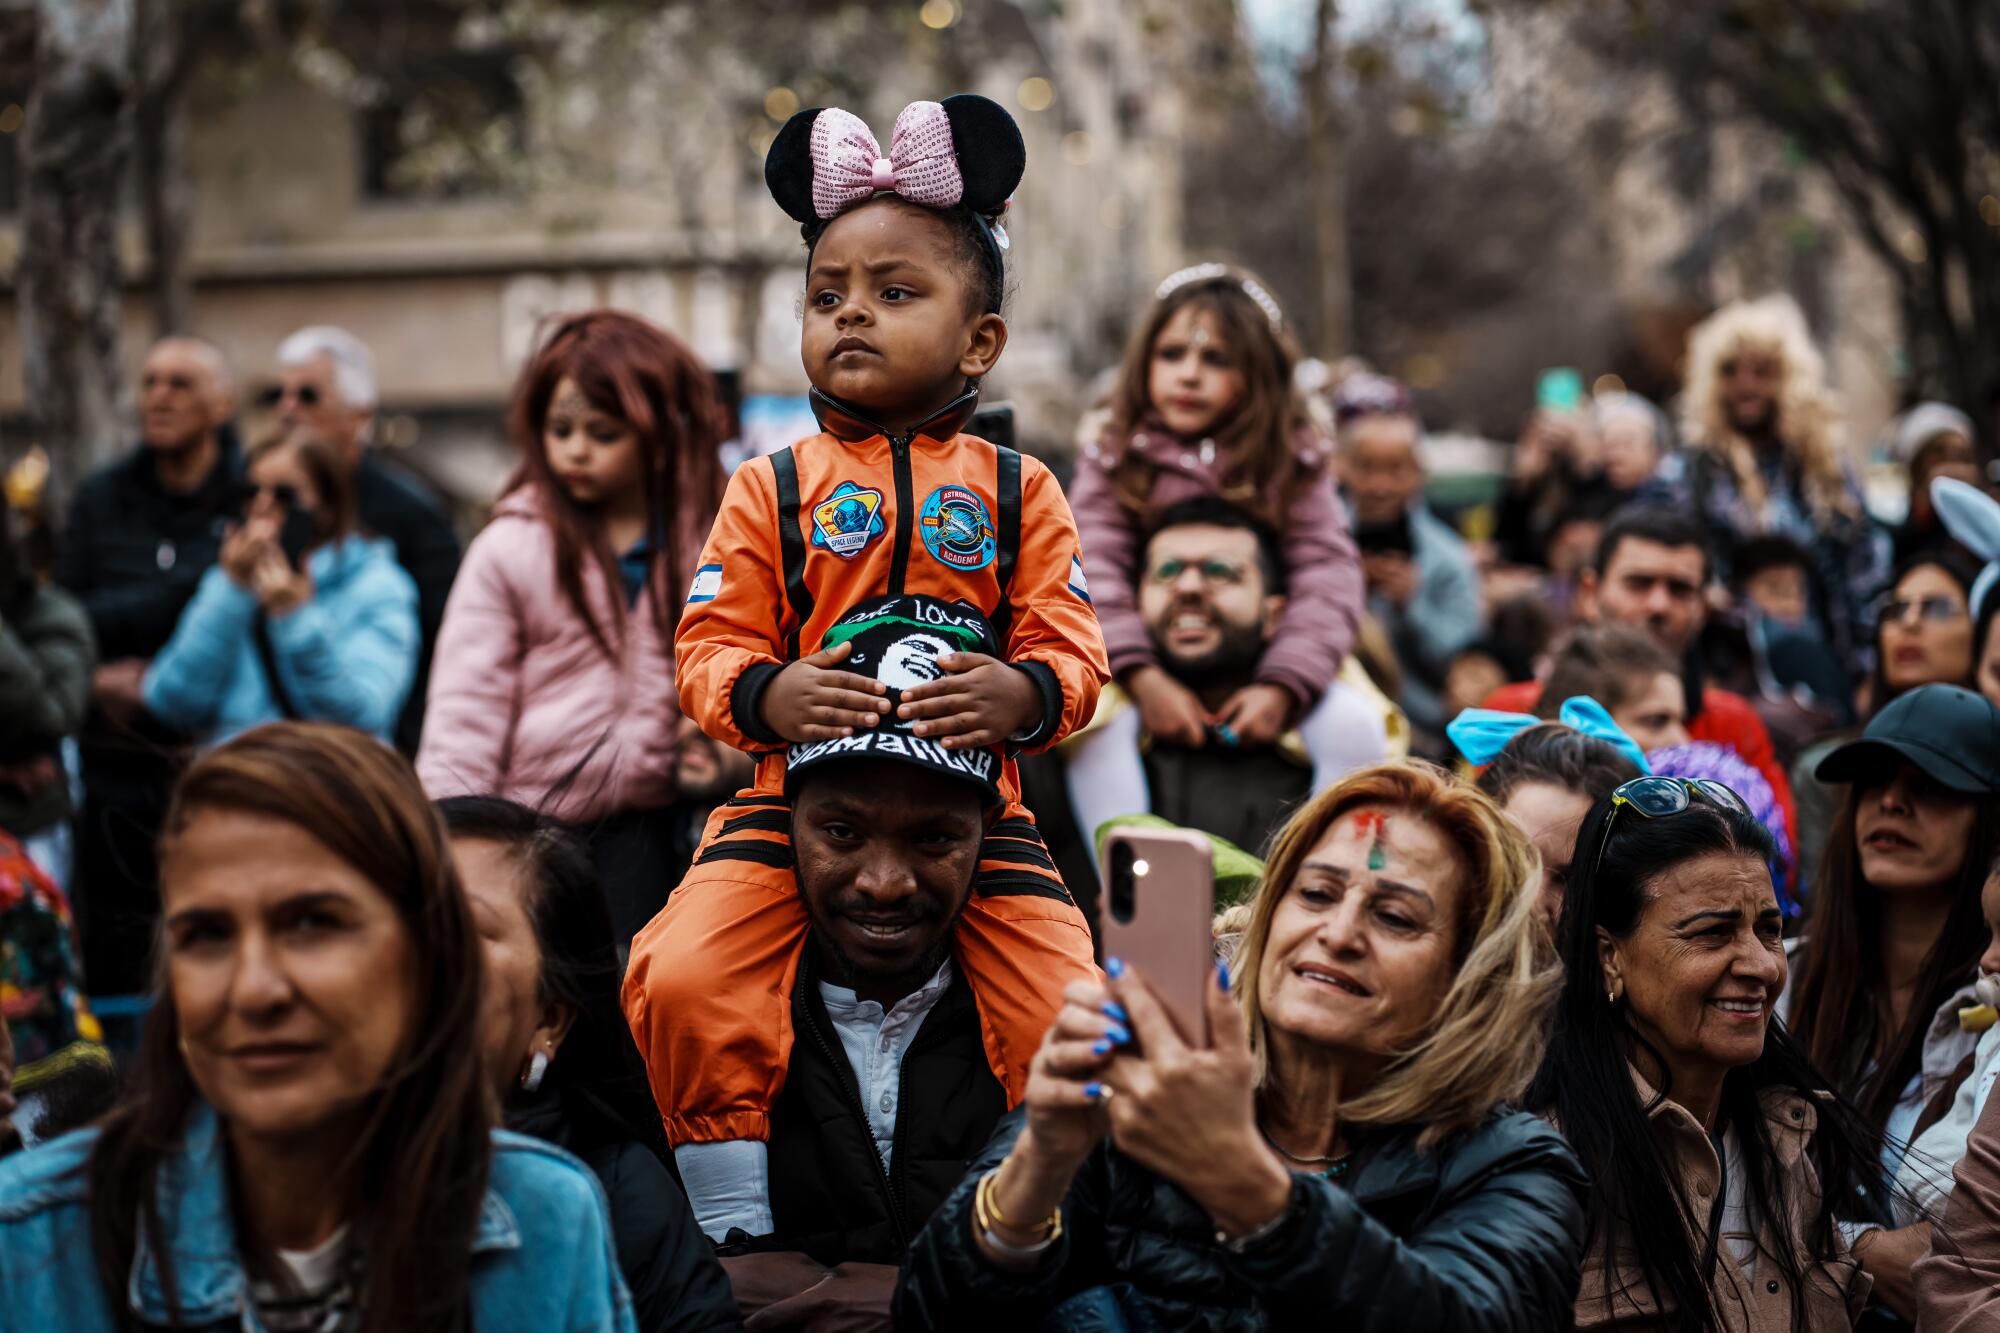 Gabriella Jember, 3, dressed as an astronaut, sits on her father’s shoulders as they attend a parade in Jerusalem.